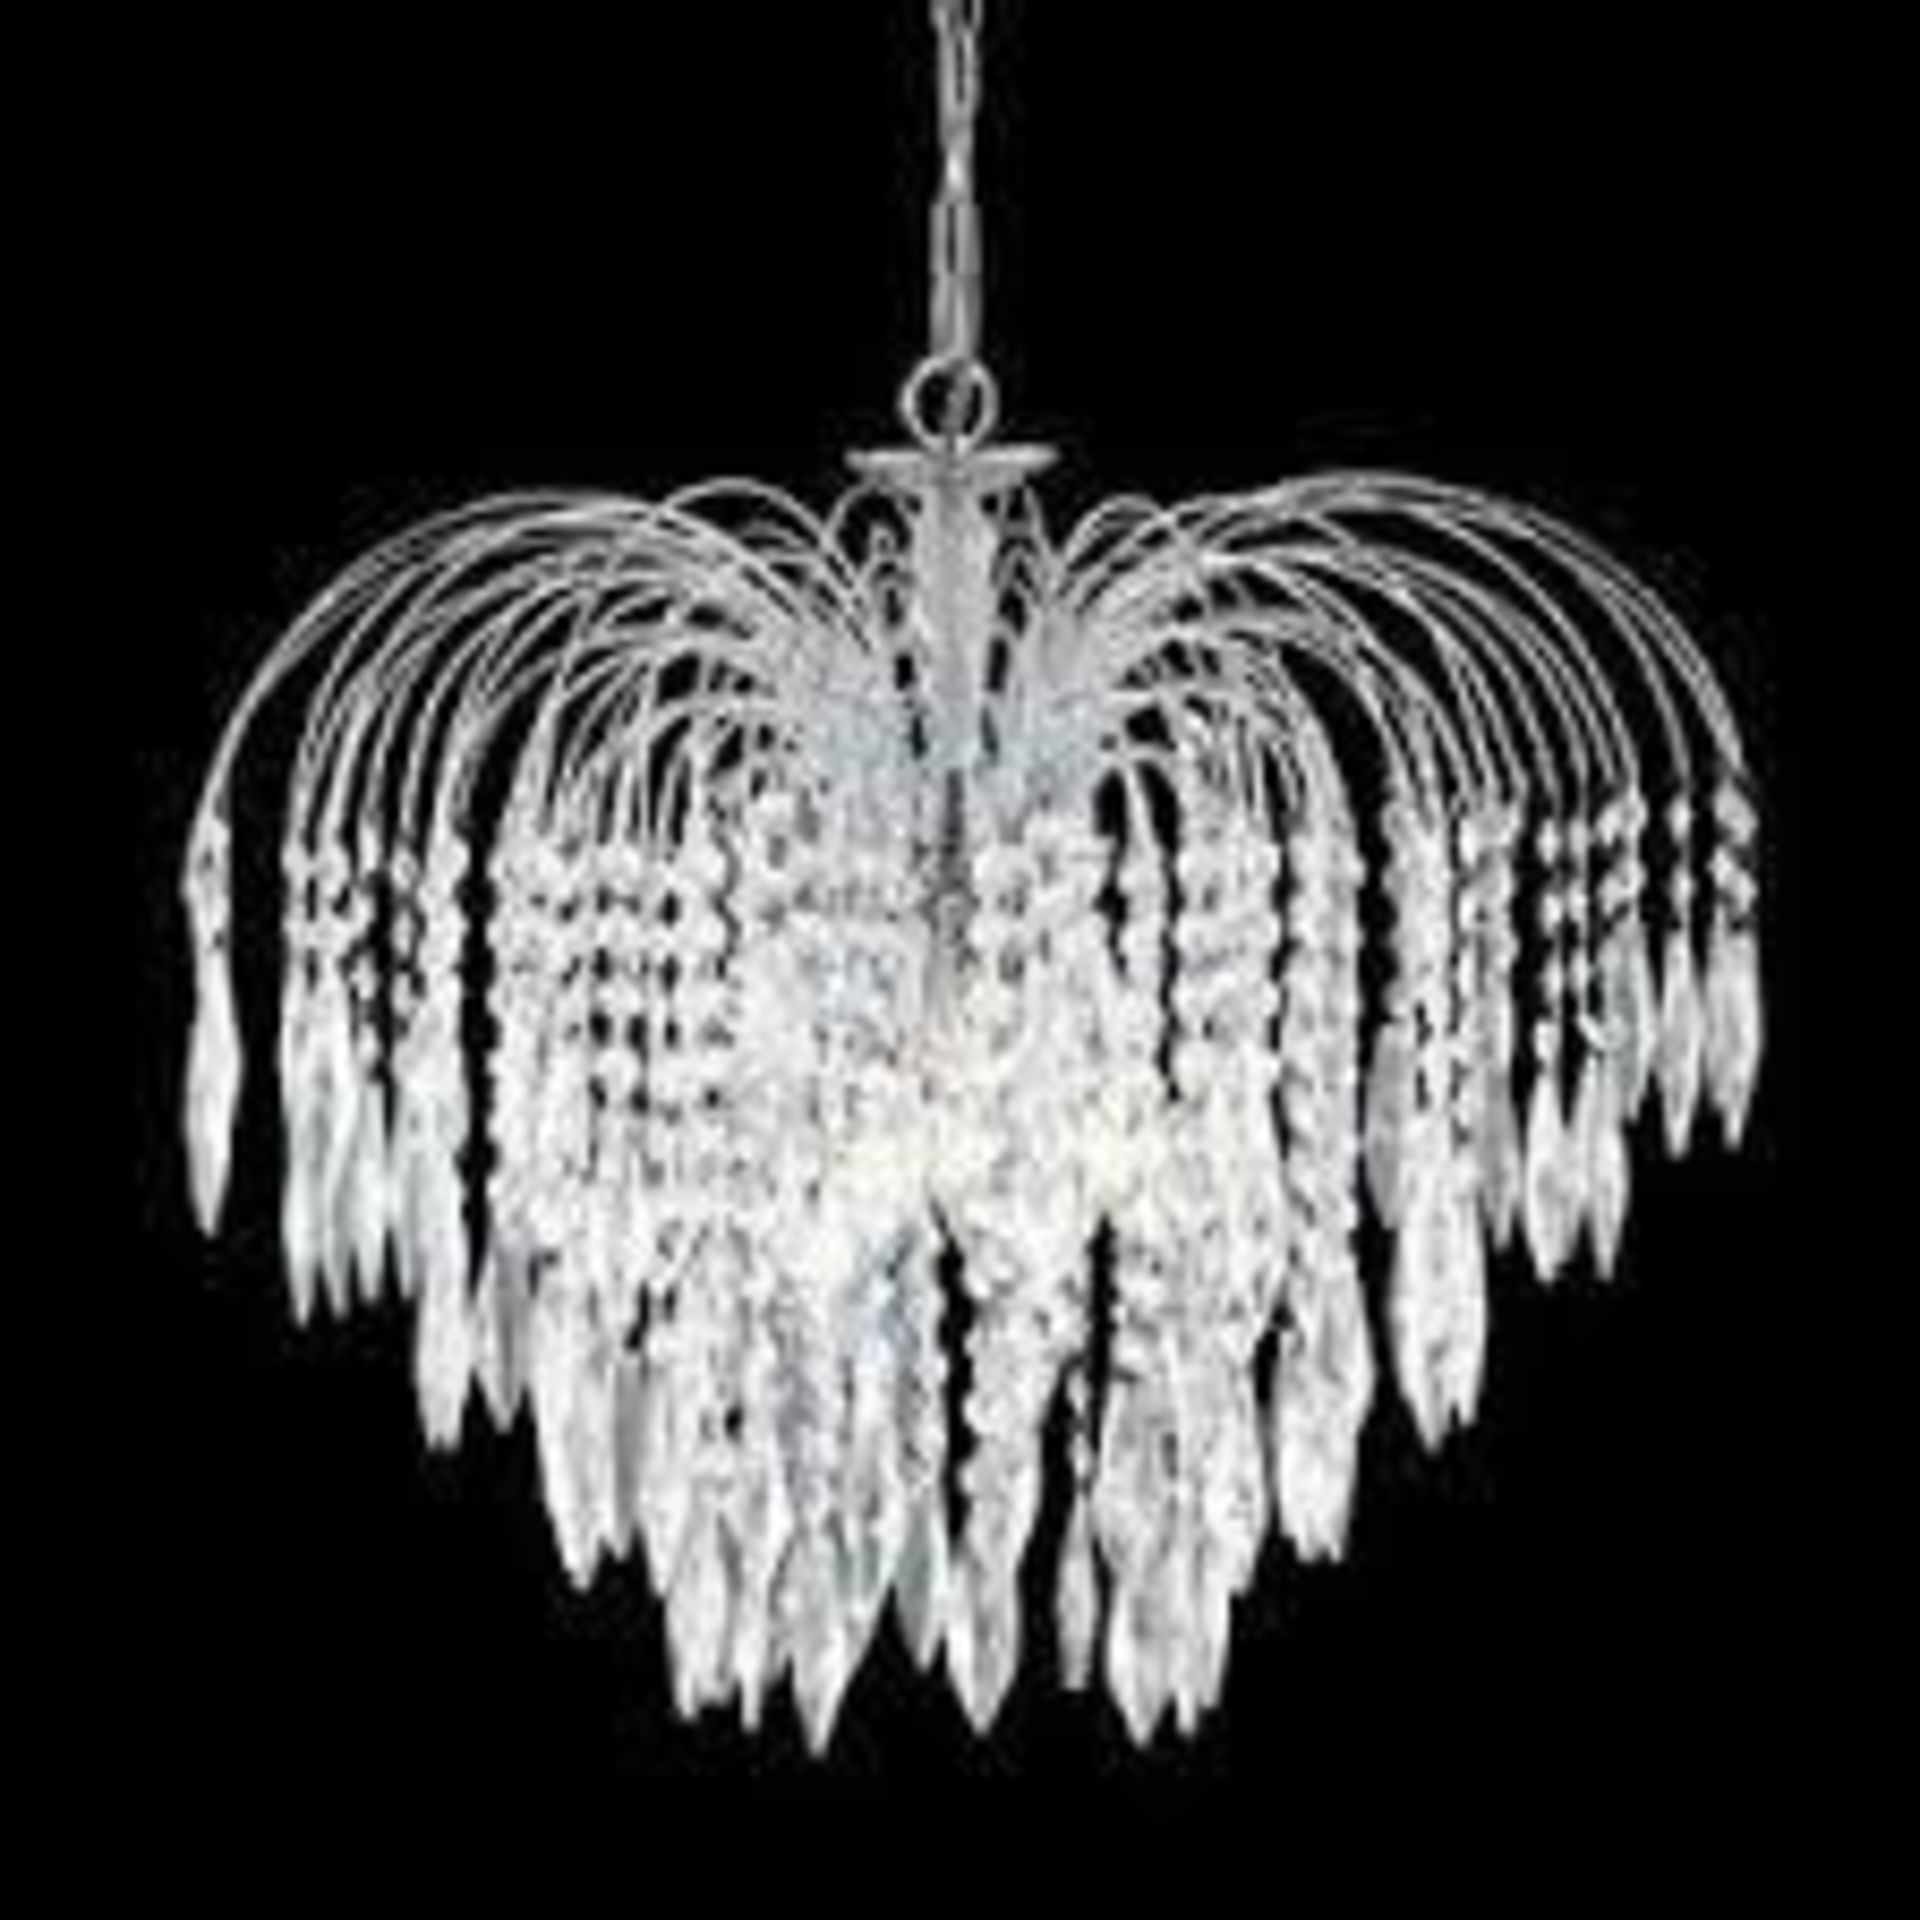 1 x Searchlight Waterfall Pendant in chrome with clear crystal glass trimmings with an adjustable he - Image 4 of 4